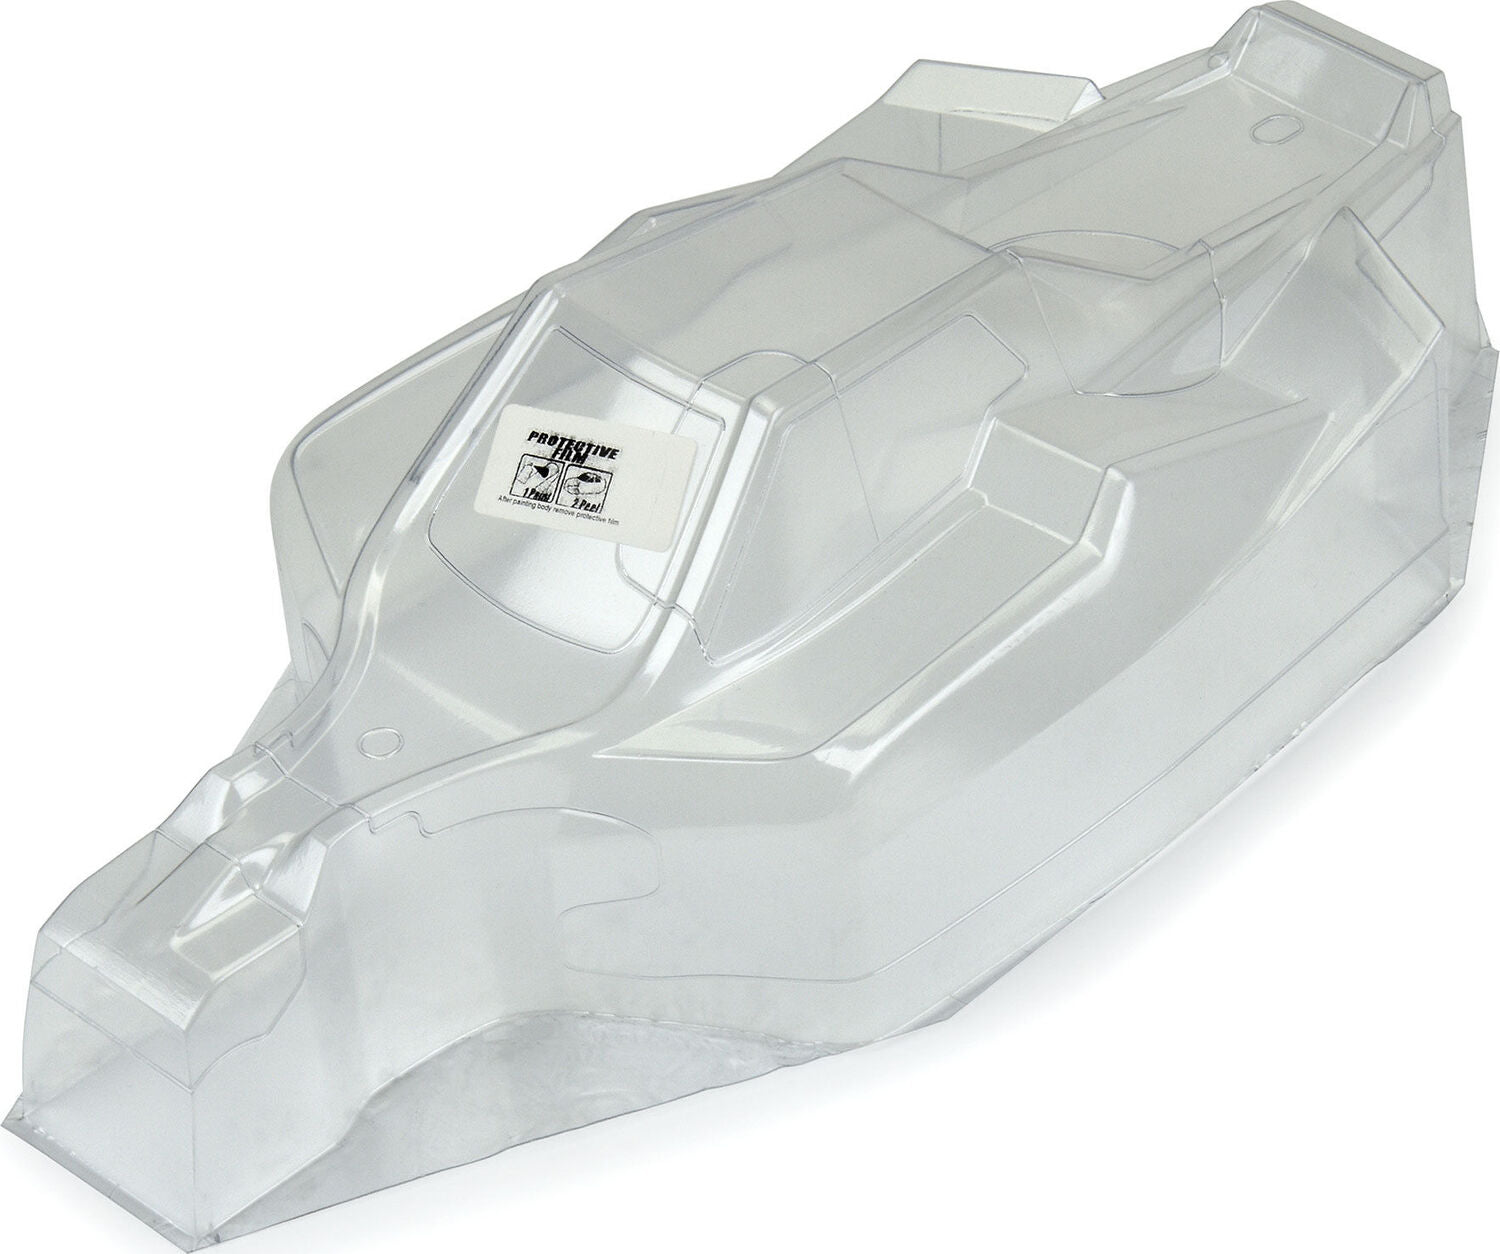 1/8 Axis Clear Body for TLR 8ight-X/E 2.0